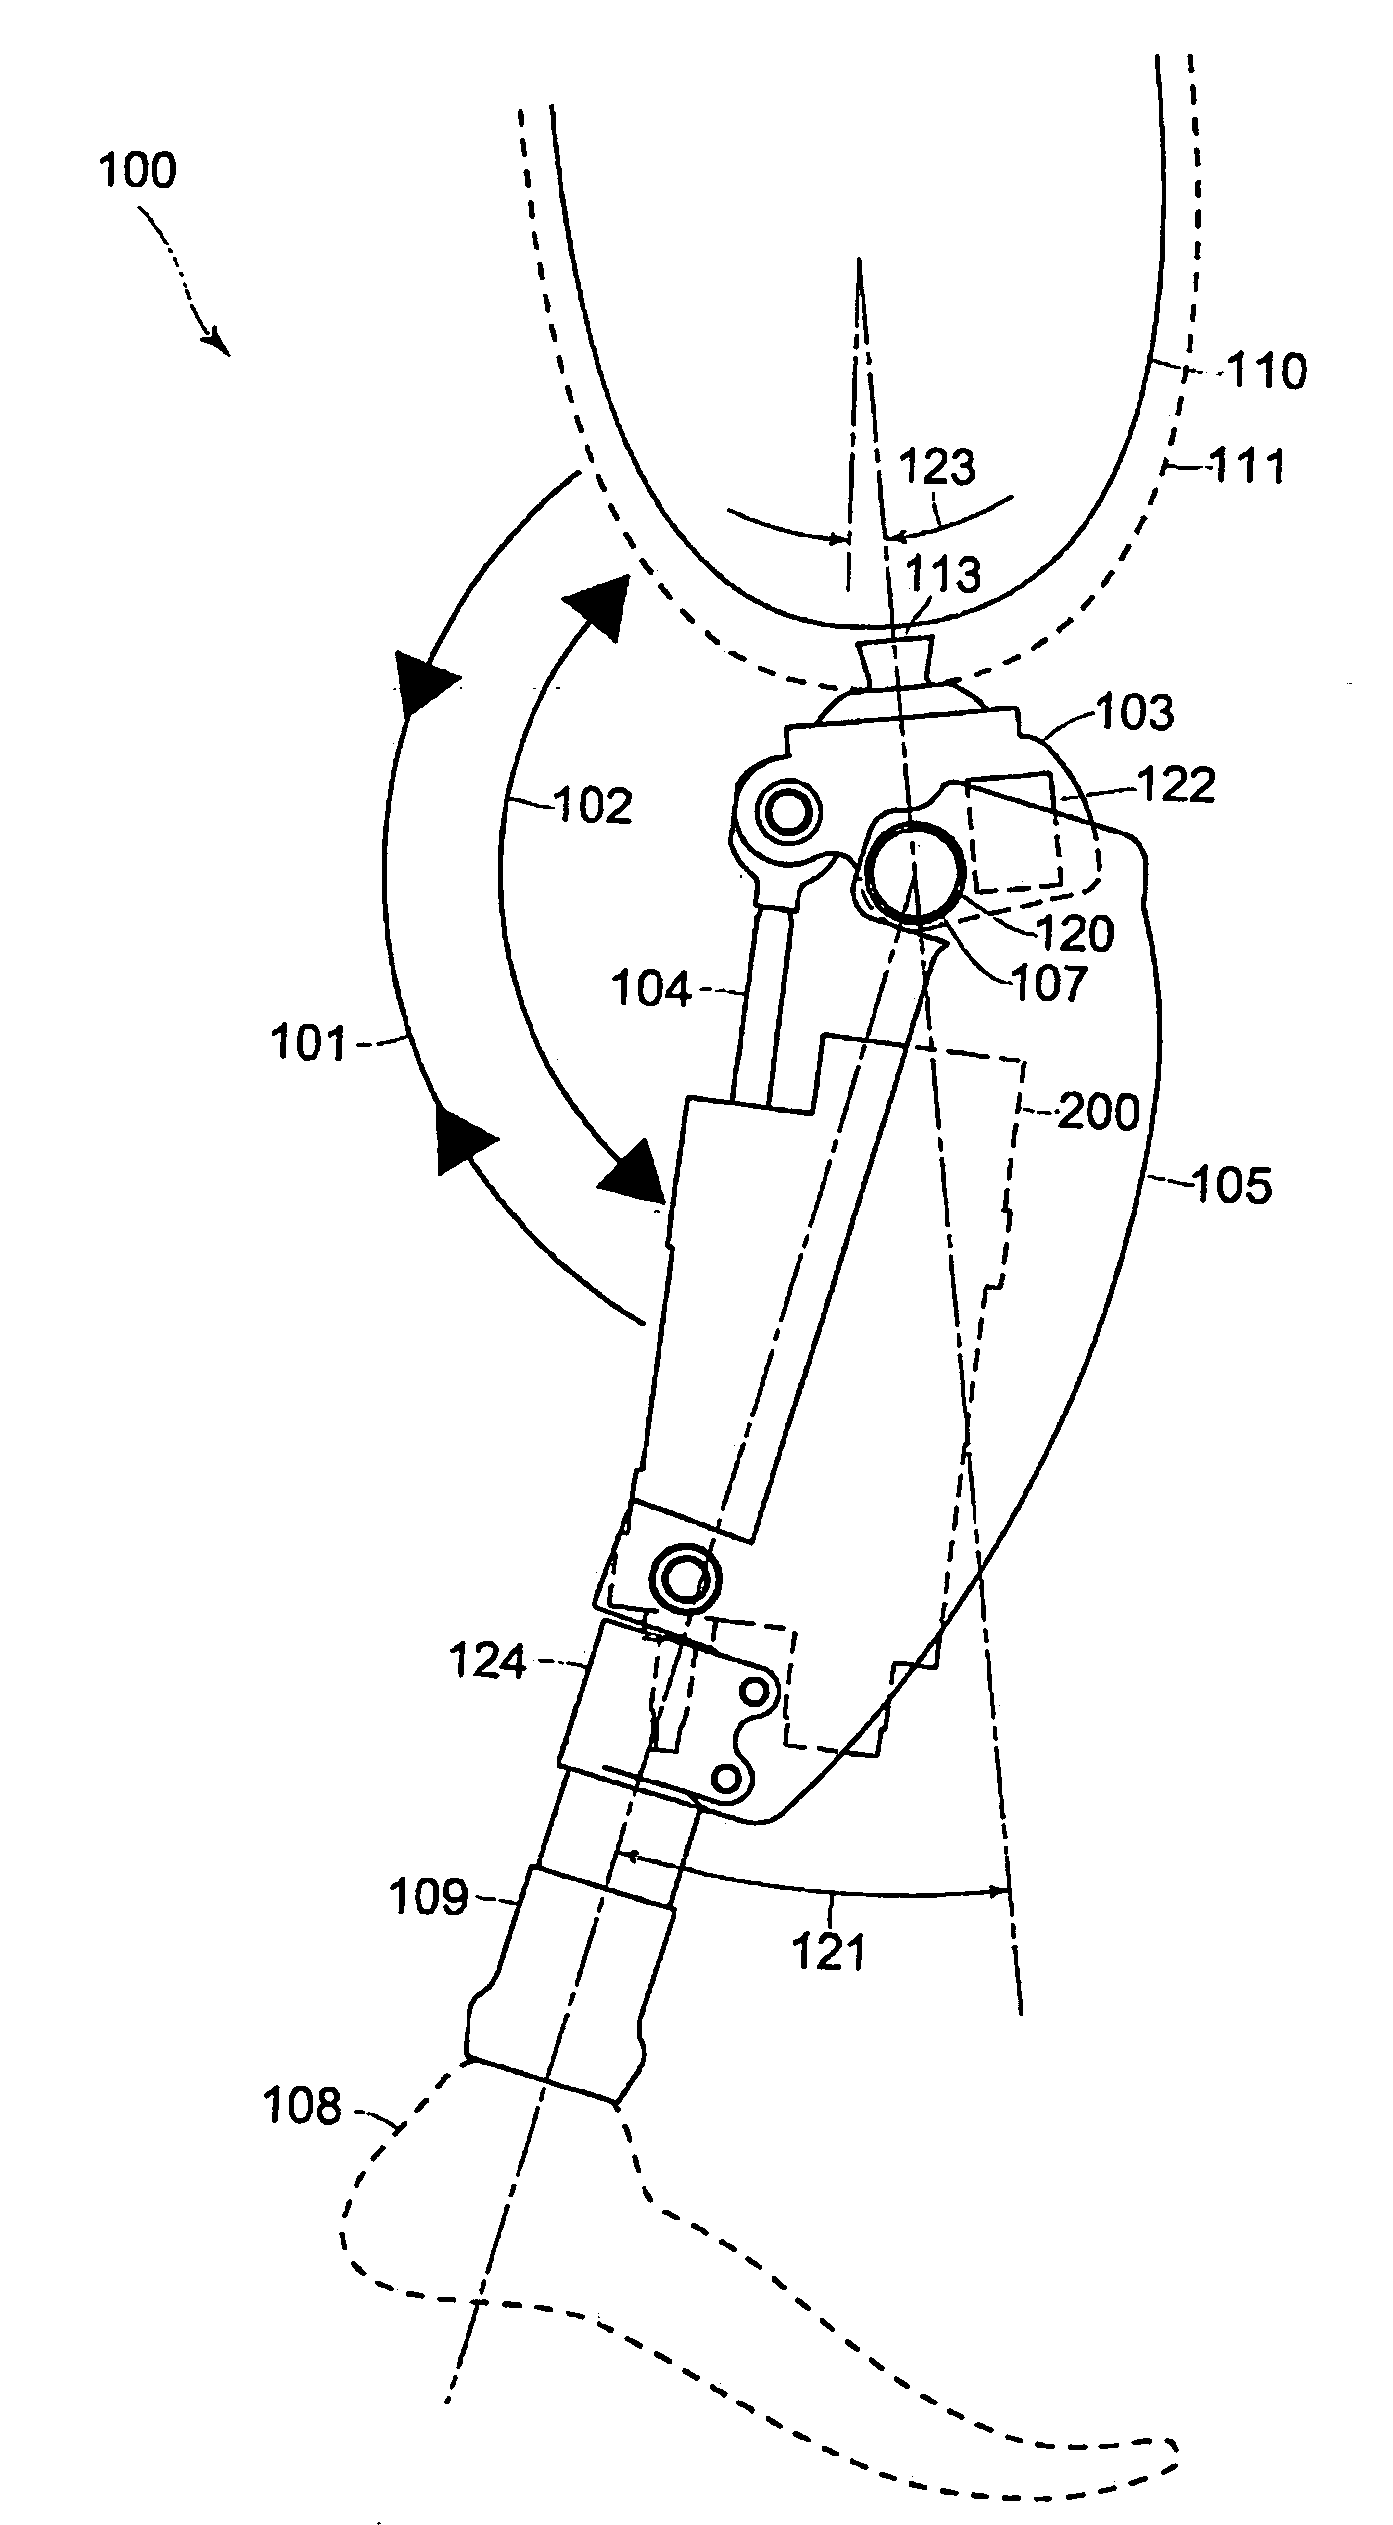 Semi-actuated transfemoral prosthetic knee